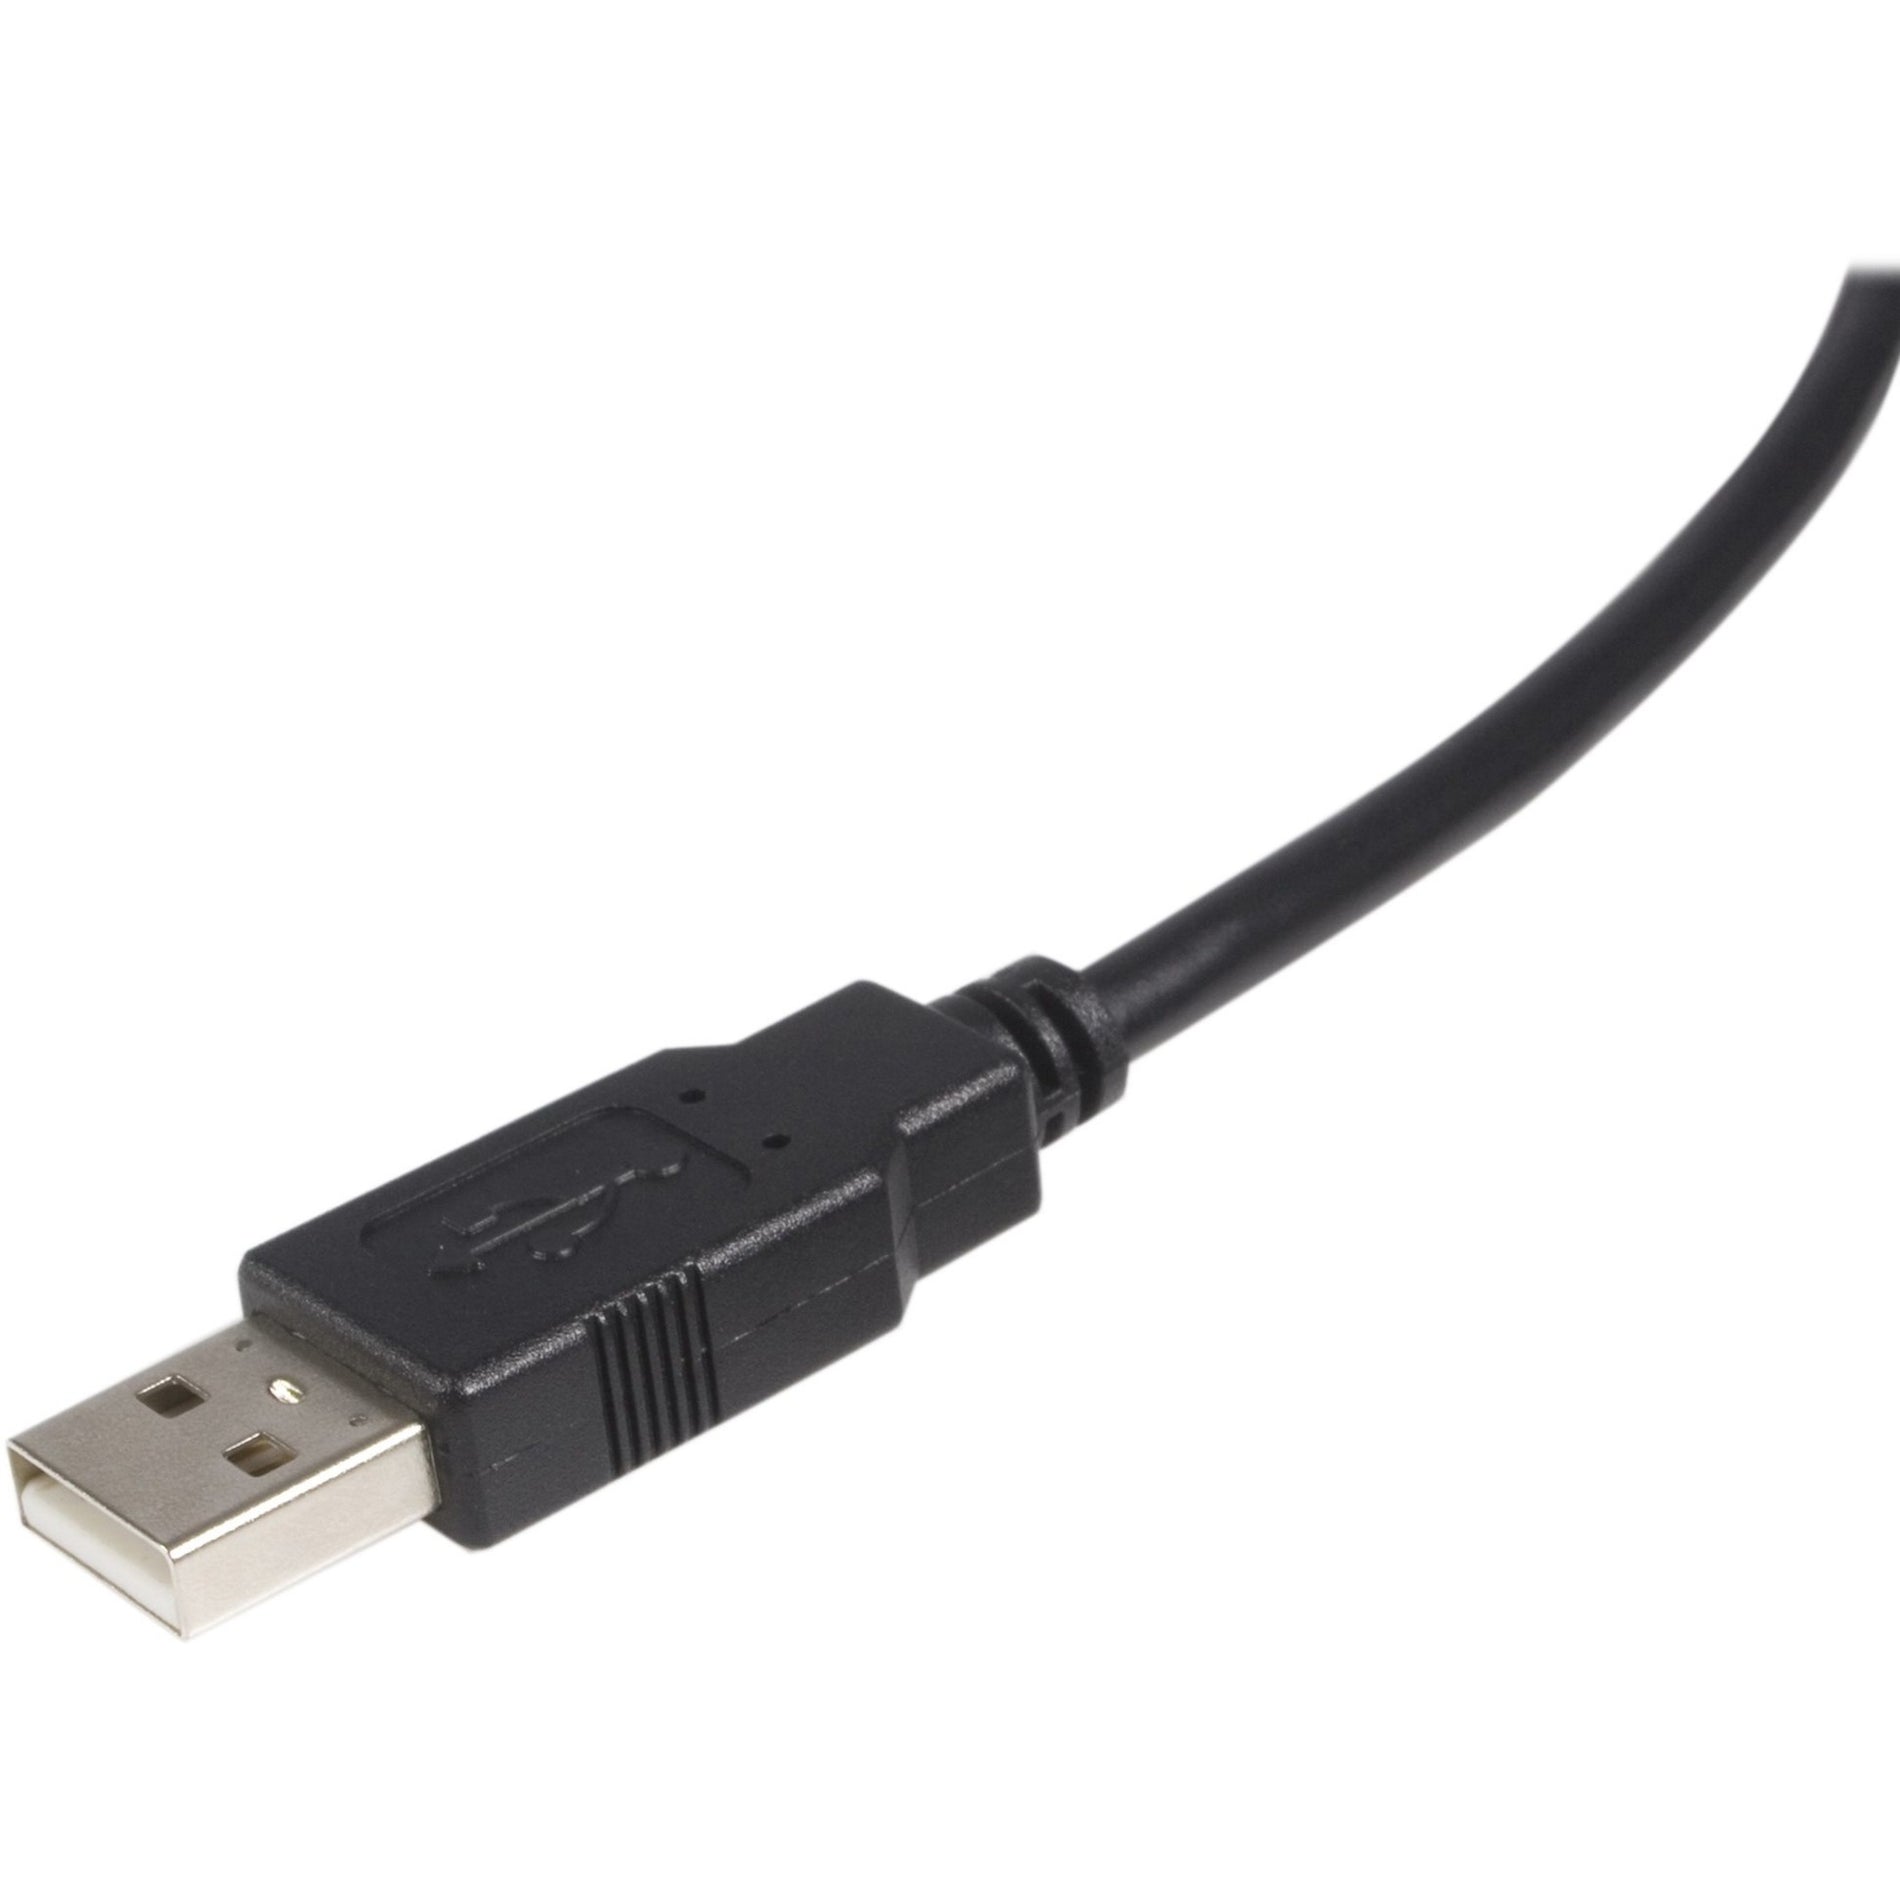 StarTech.com USB2HAB3 3ft High Speed Certified USB 2.0 Cable, Lifetime Warranty, Fast Data Transfer